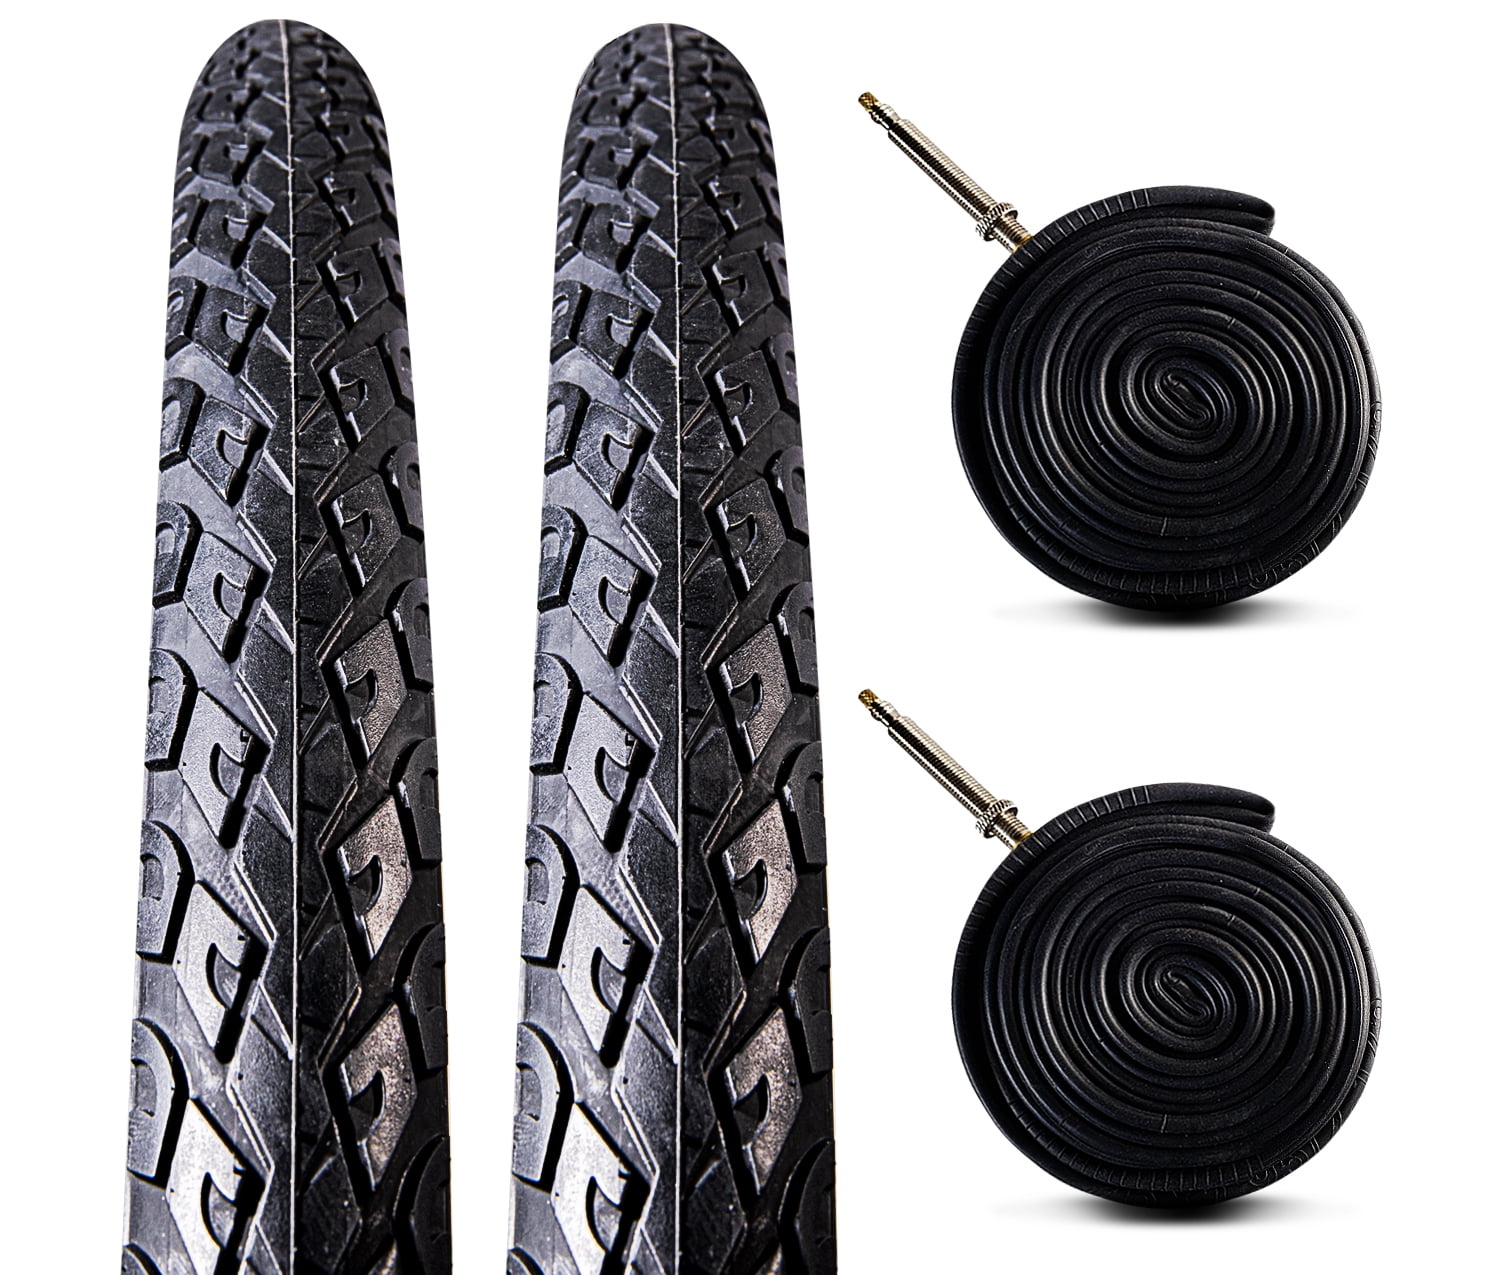 Details about   700x30-43c Bicycle Inner Tubes 700x38c 700x40c for Kids Mountain Bike Cruiser 